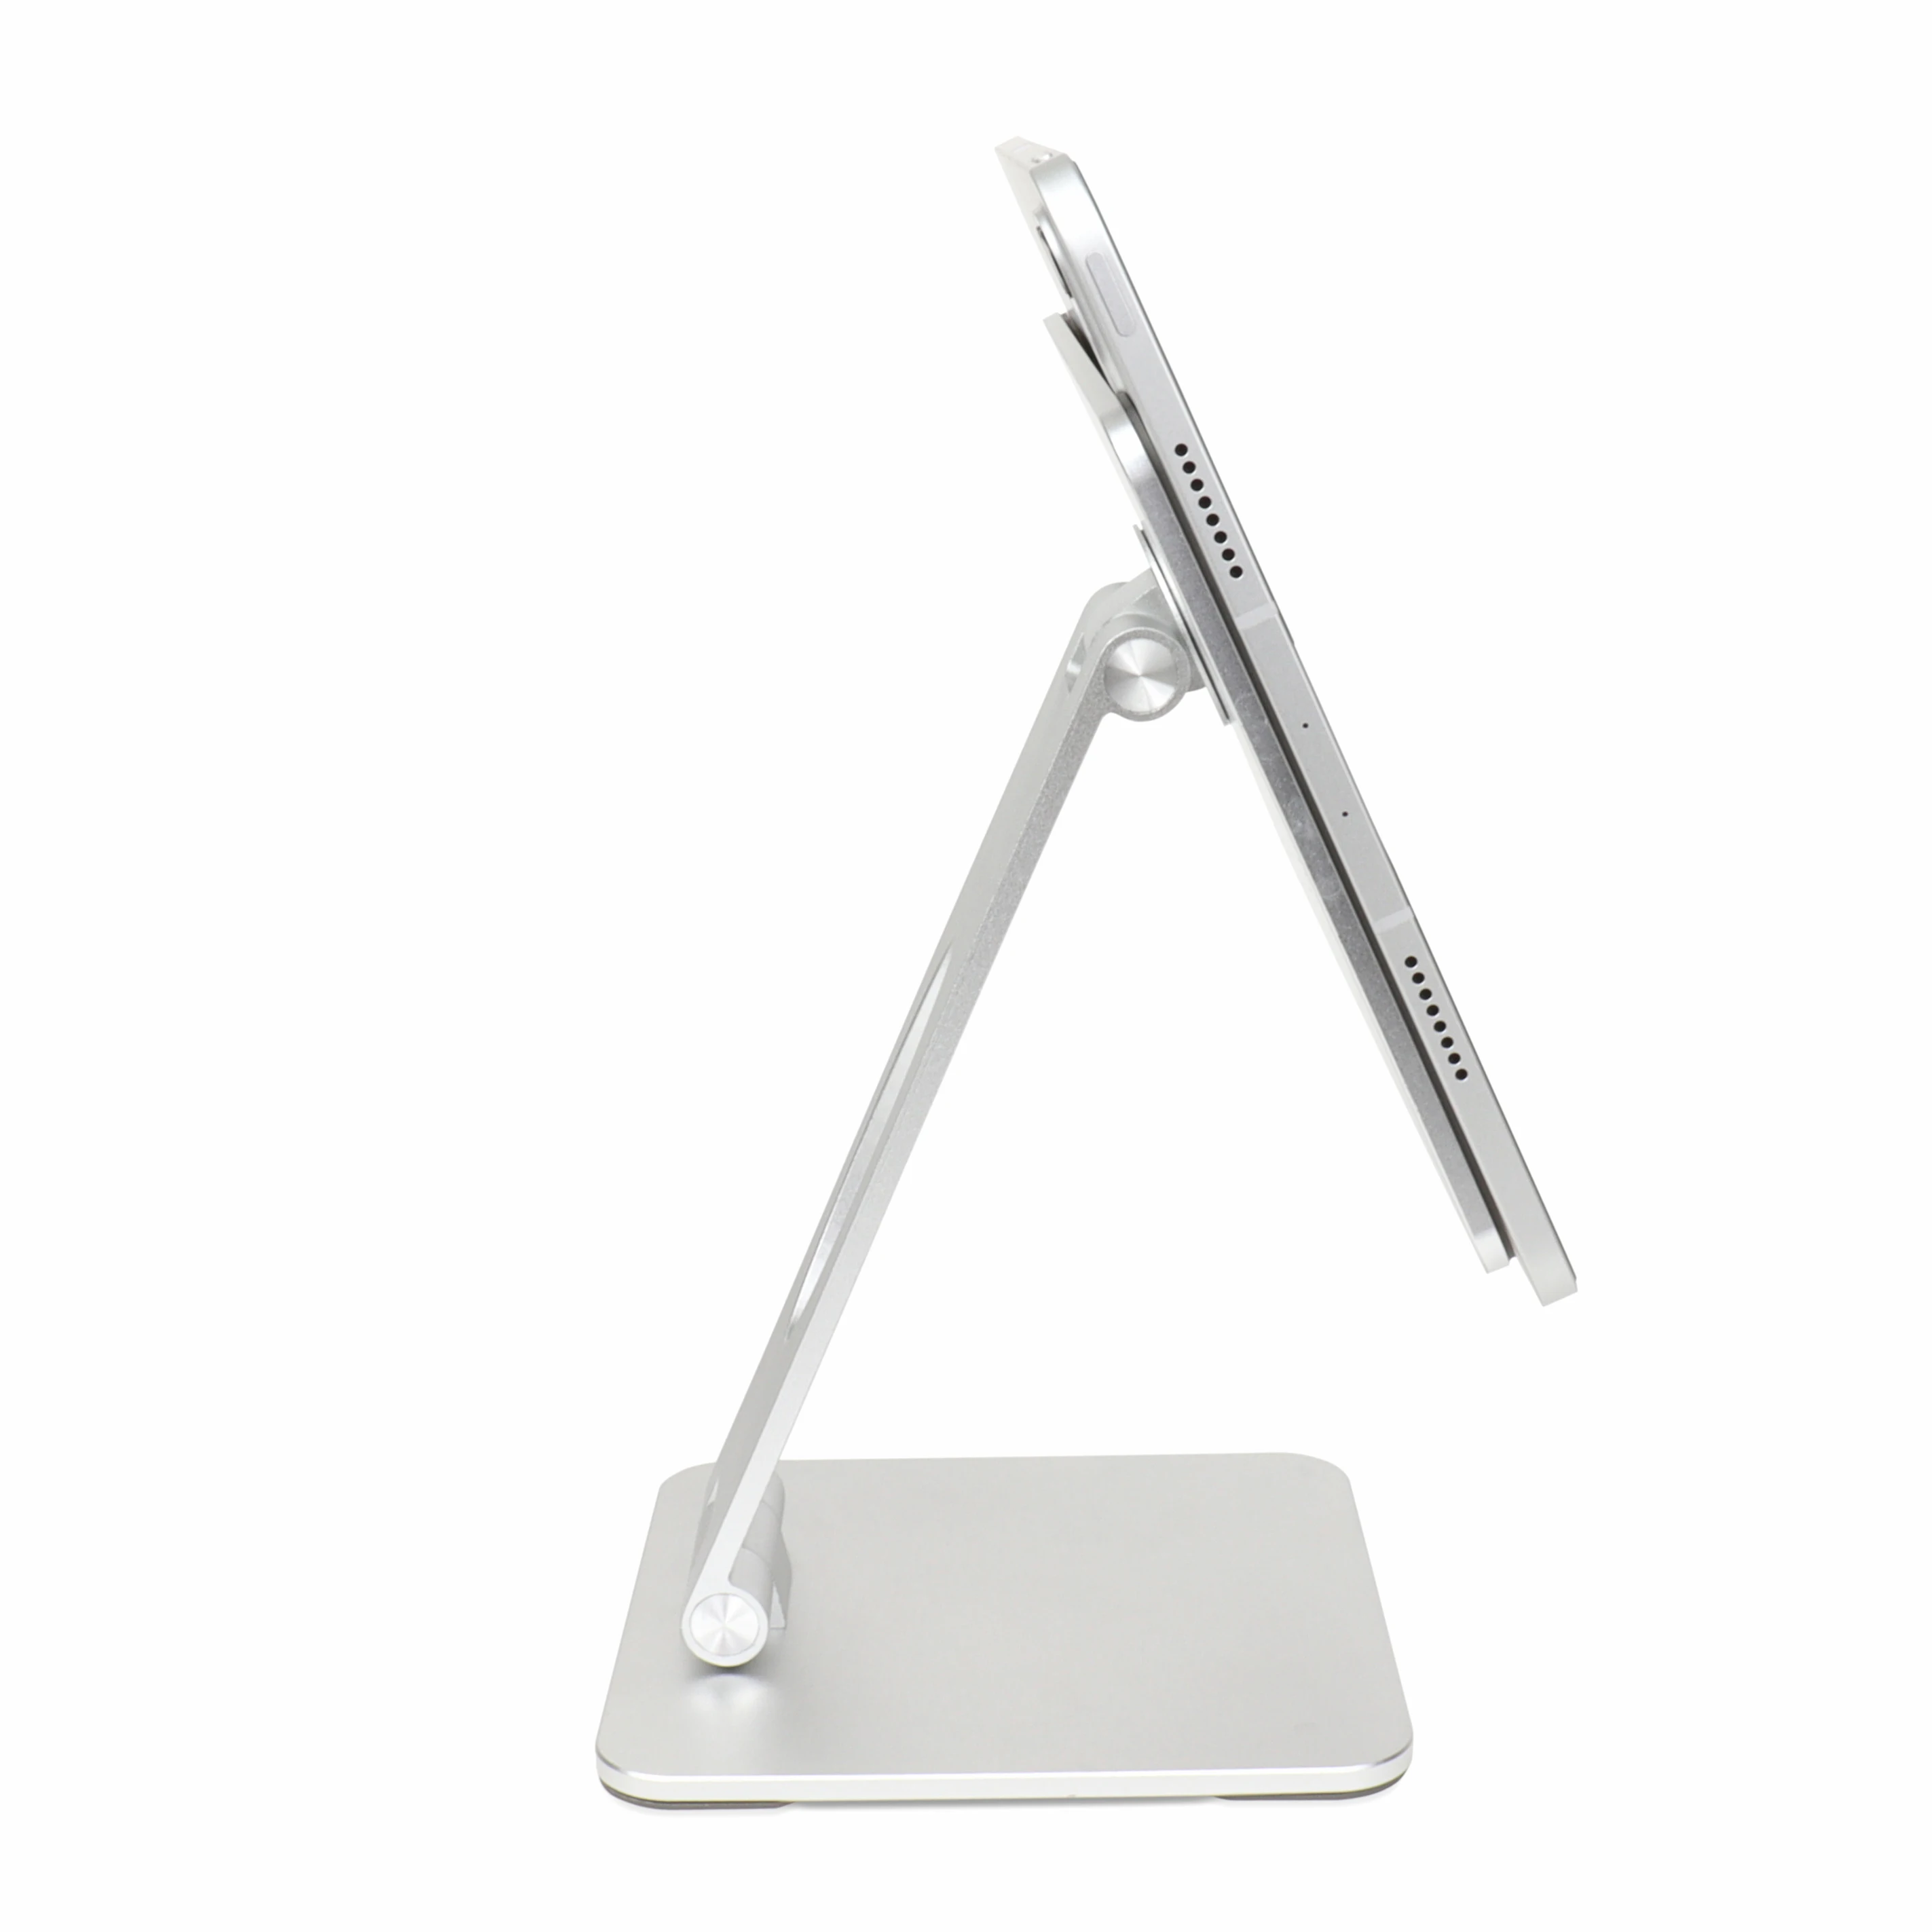 New Style Collapsible Magnet tablet stand holder High quality aluminum alloy for 11inch ipad images - 6